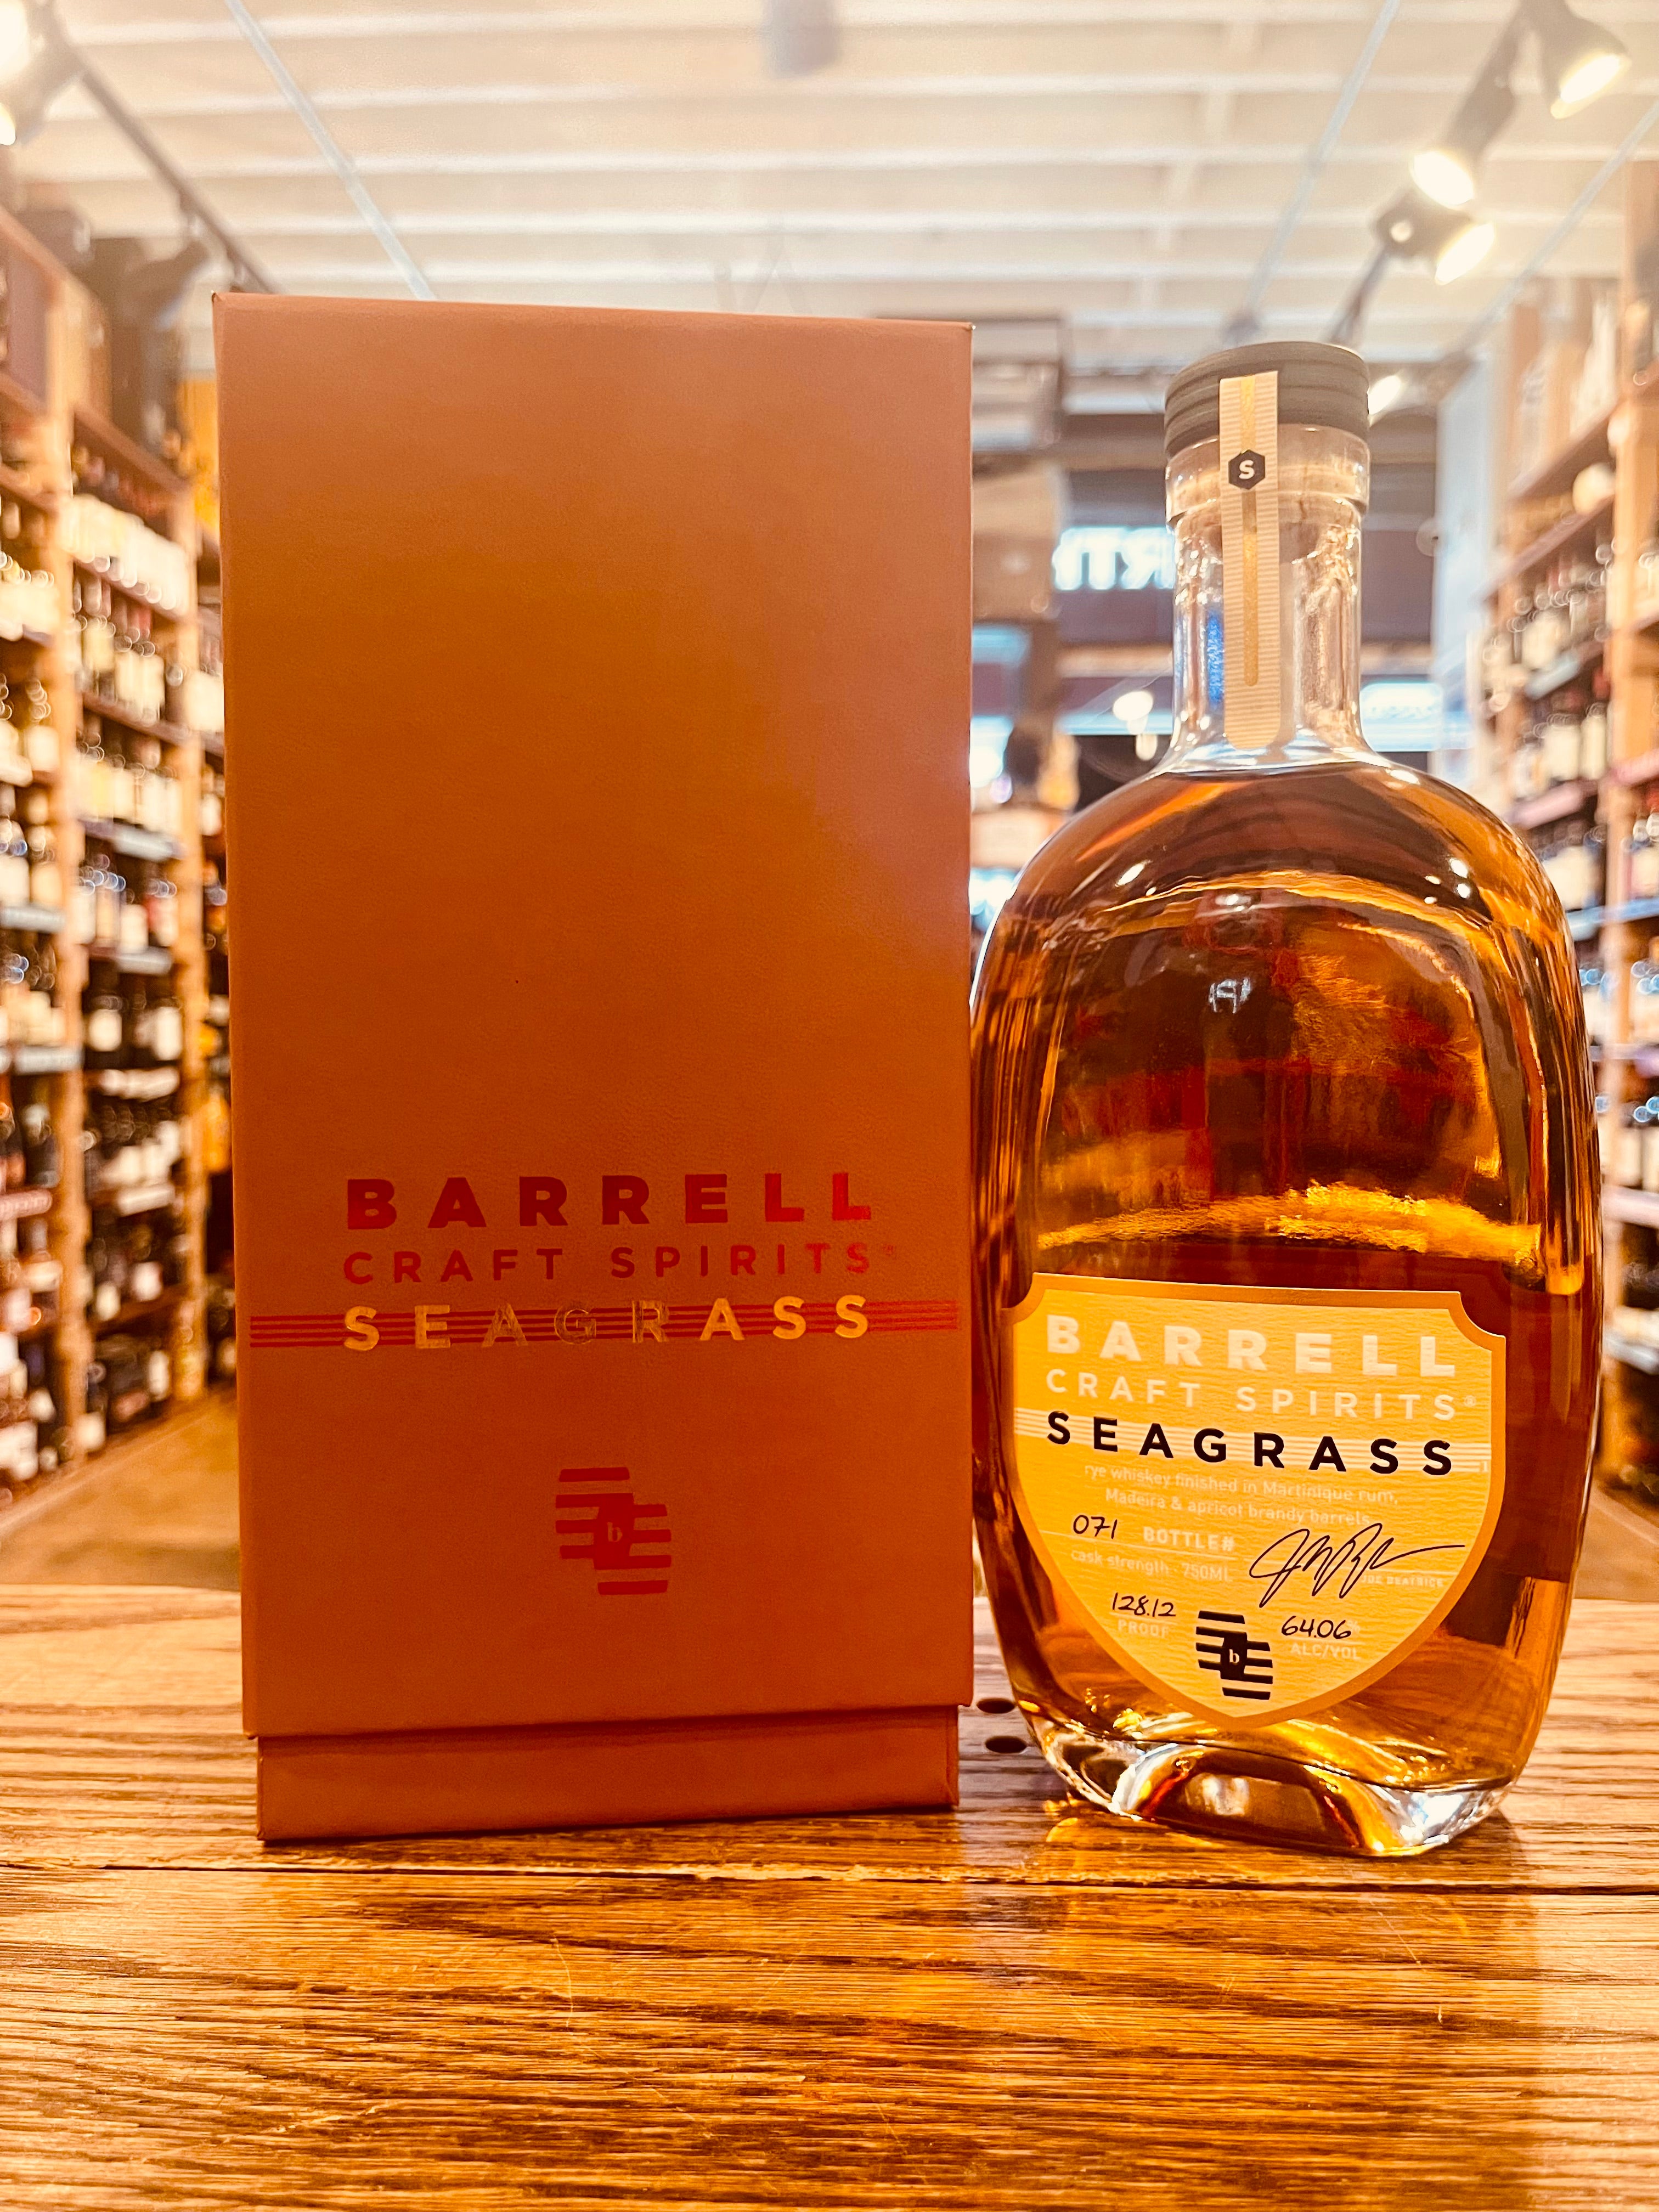 Barrell Craft Spirits Seagrass (Gold Label) 750mL a rustic colored box next to a oval shaped clear bottle with yellow labeling